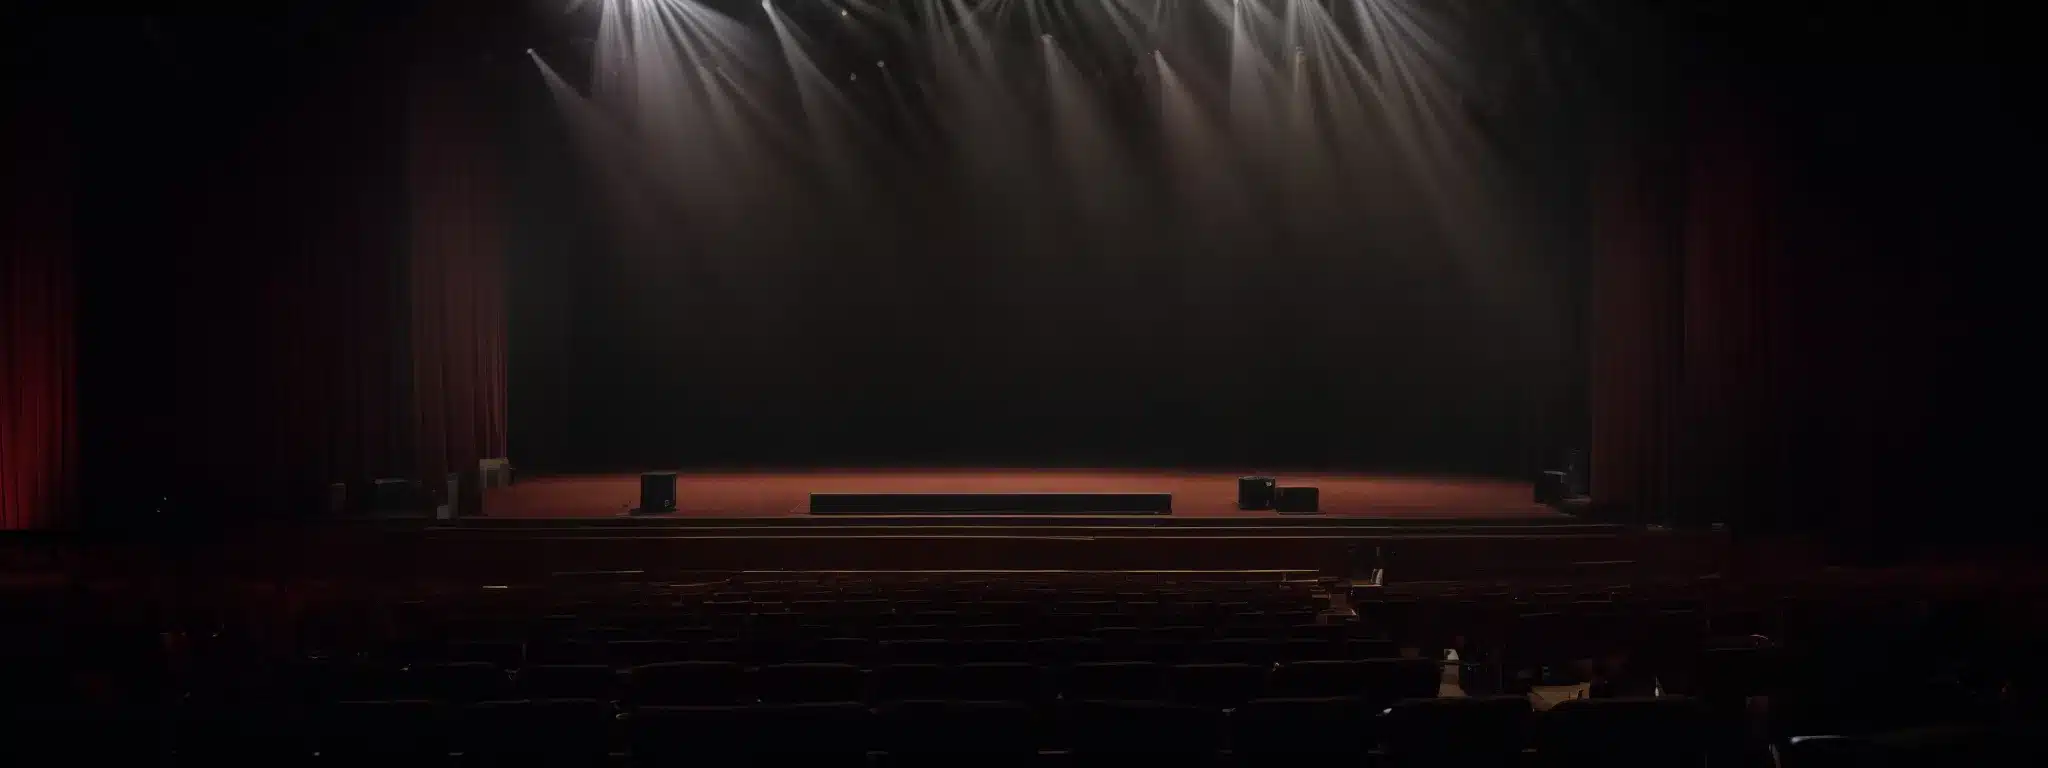 A Spotlight Shines On A Stage With An Empty Theater, Symbolizing The Focus And Precision Of Performance Marketing In The Spotlight Of Progress.